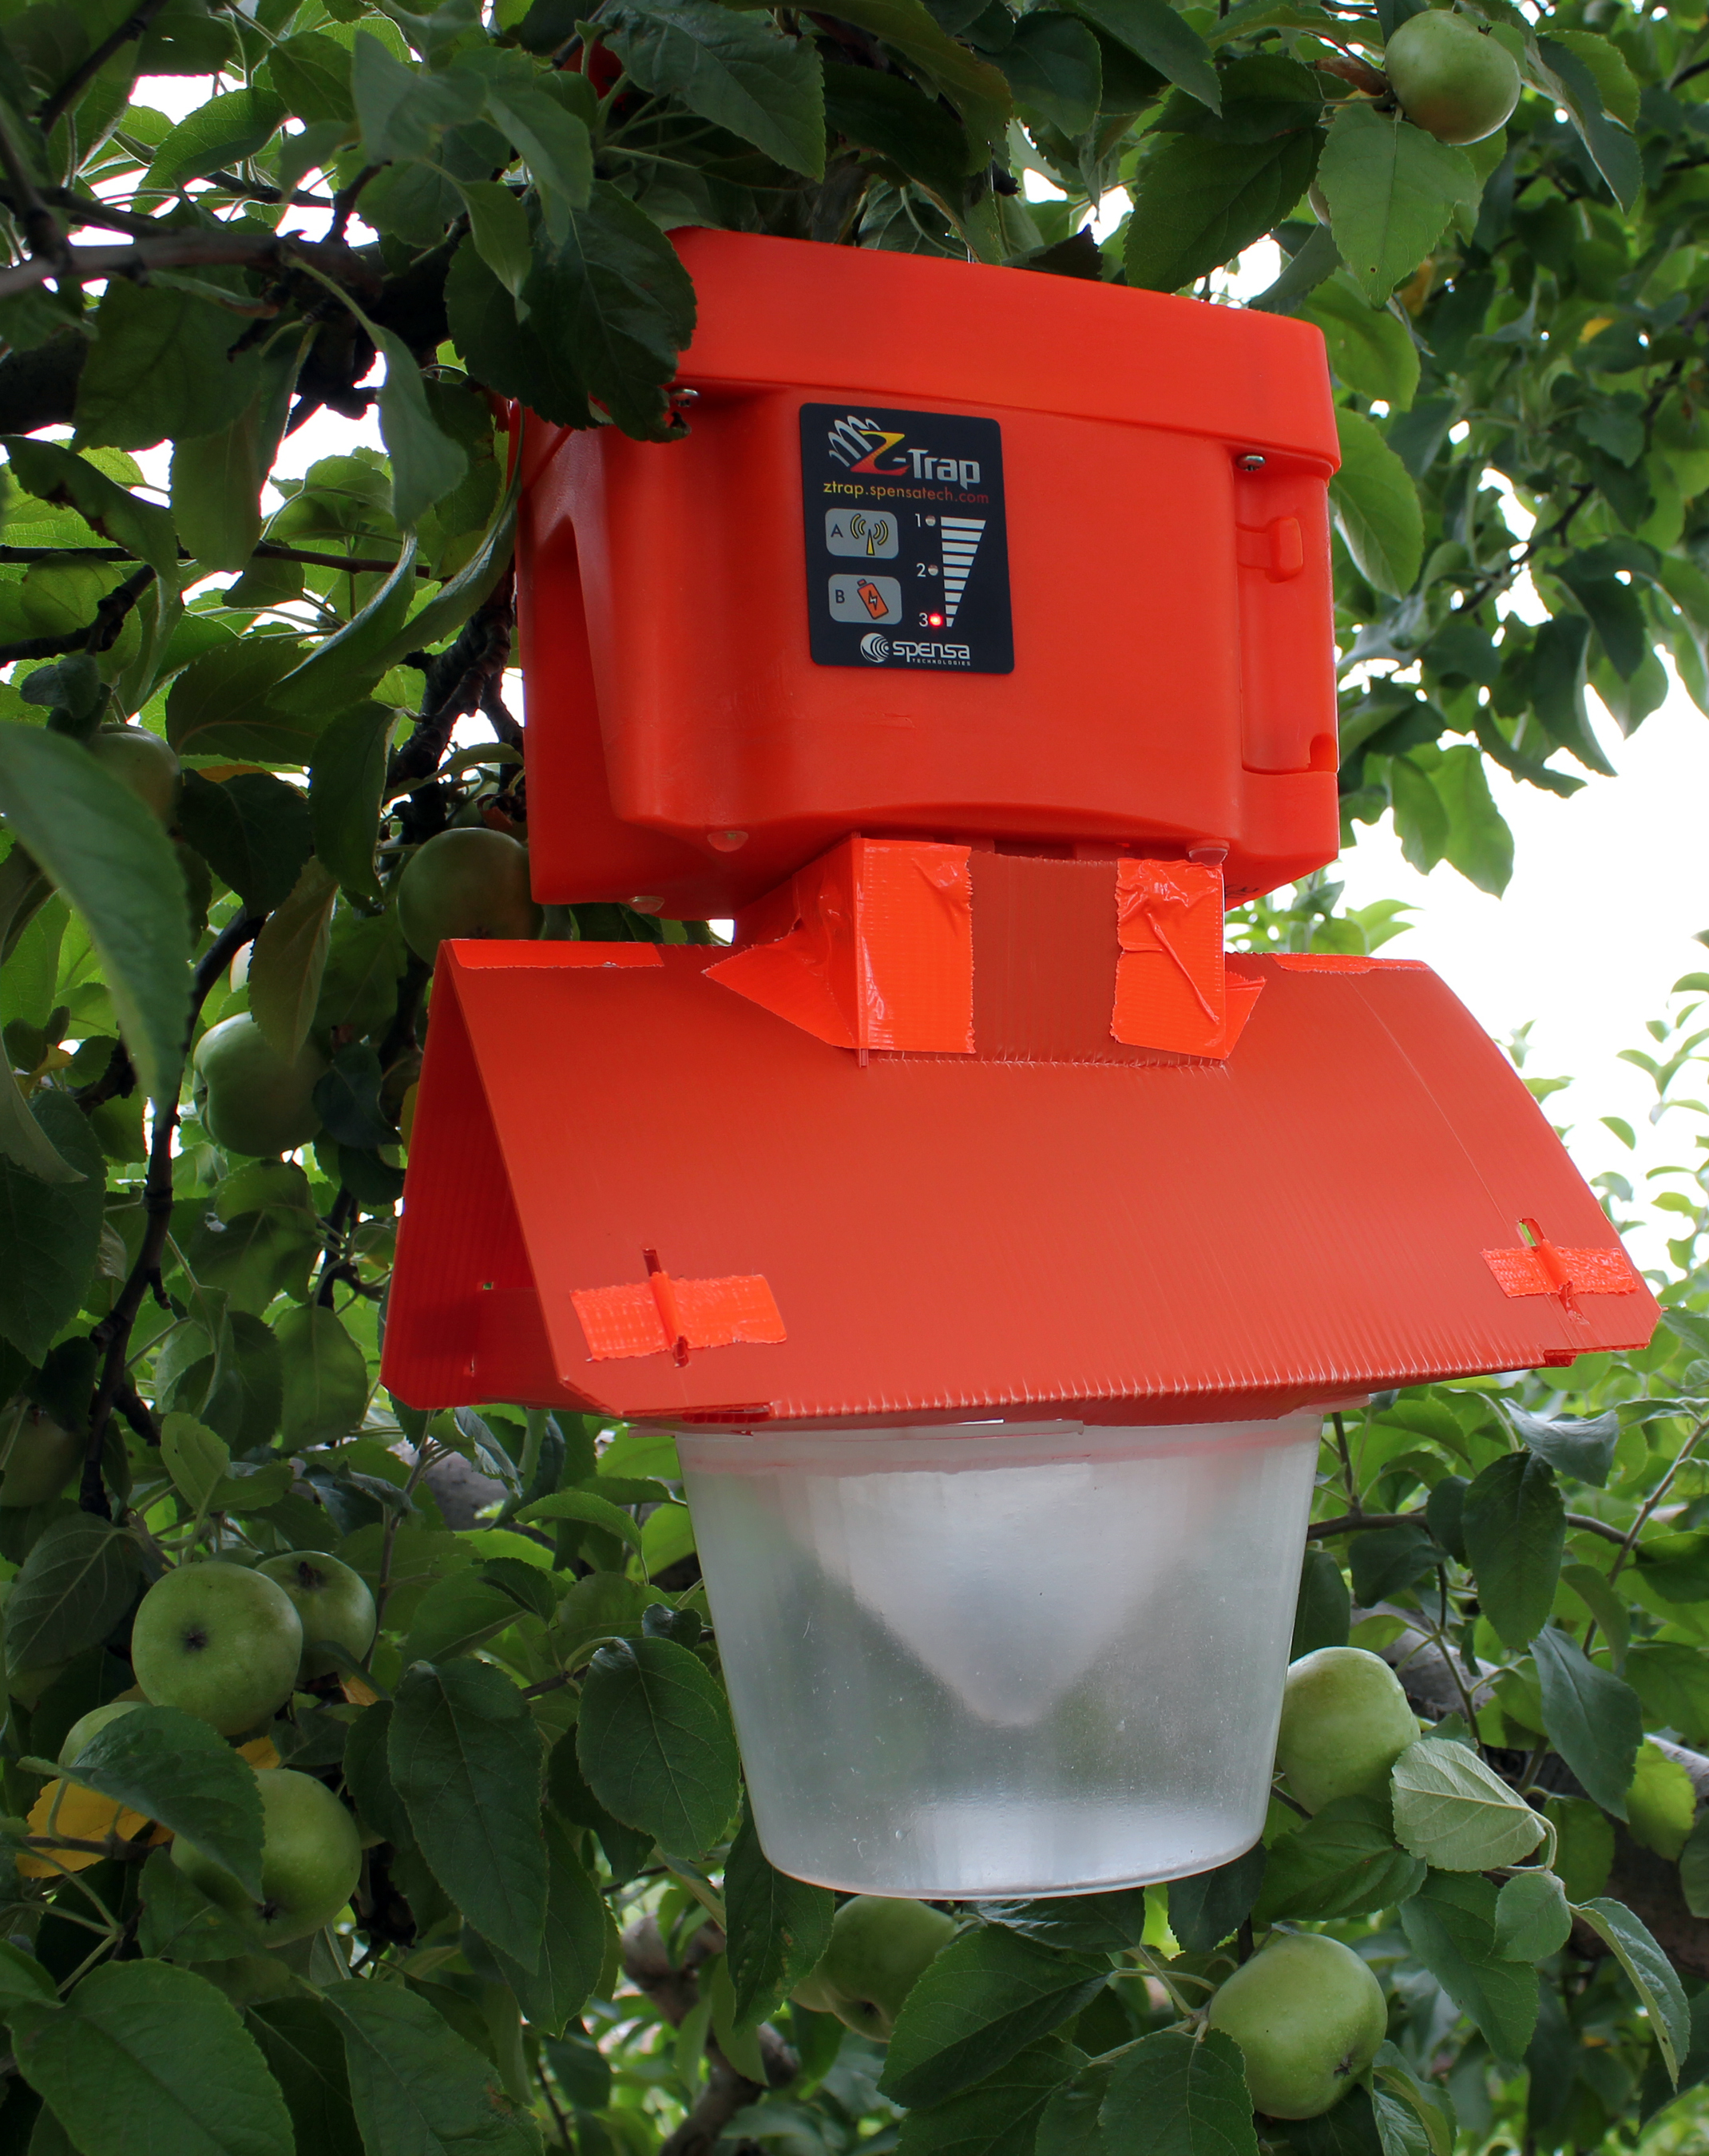 New Agricultural Electronic Insect Trap Saves Labor Monitors Insect